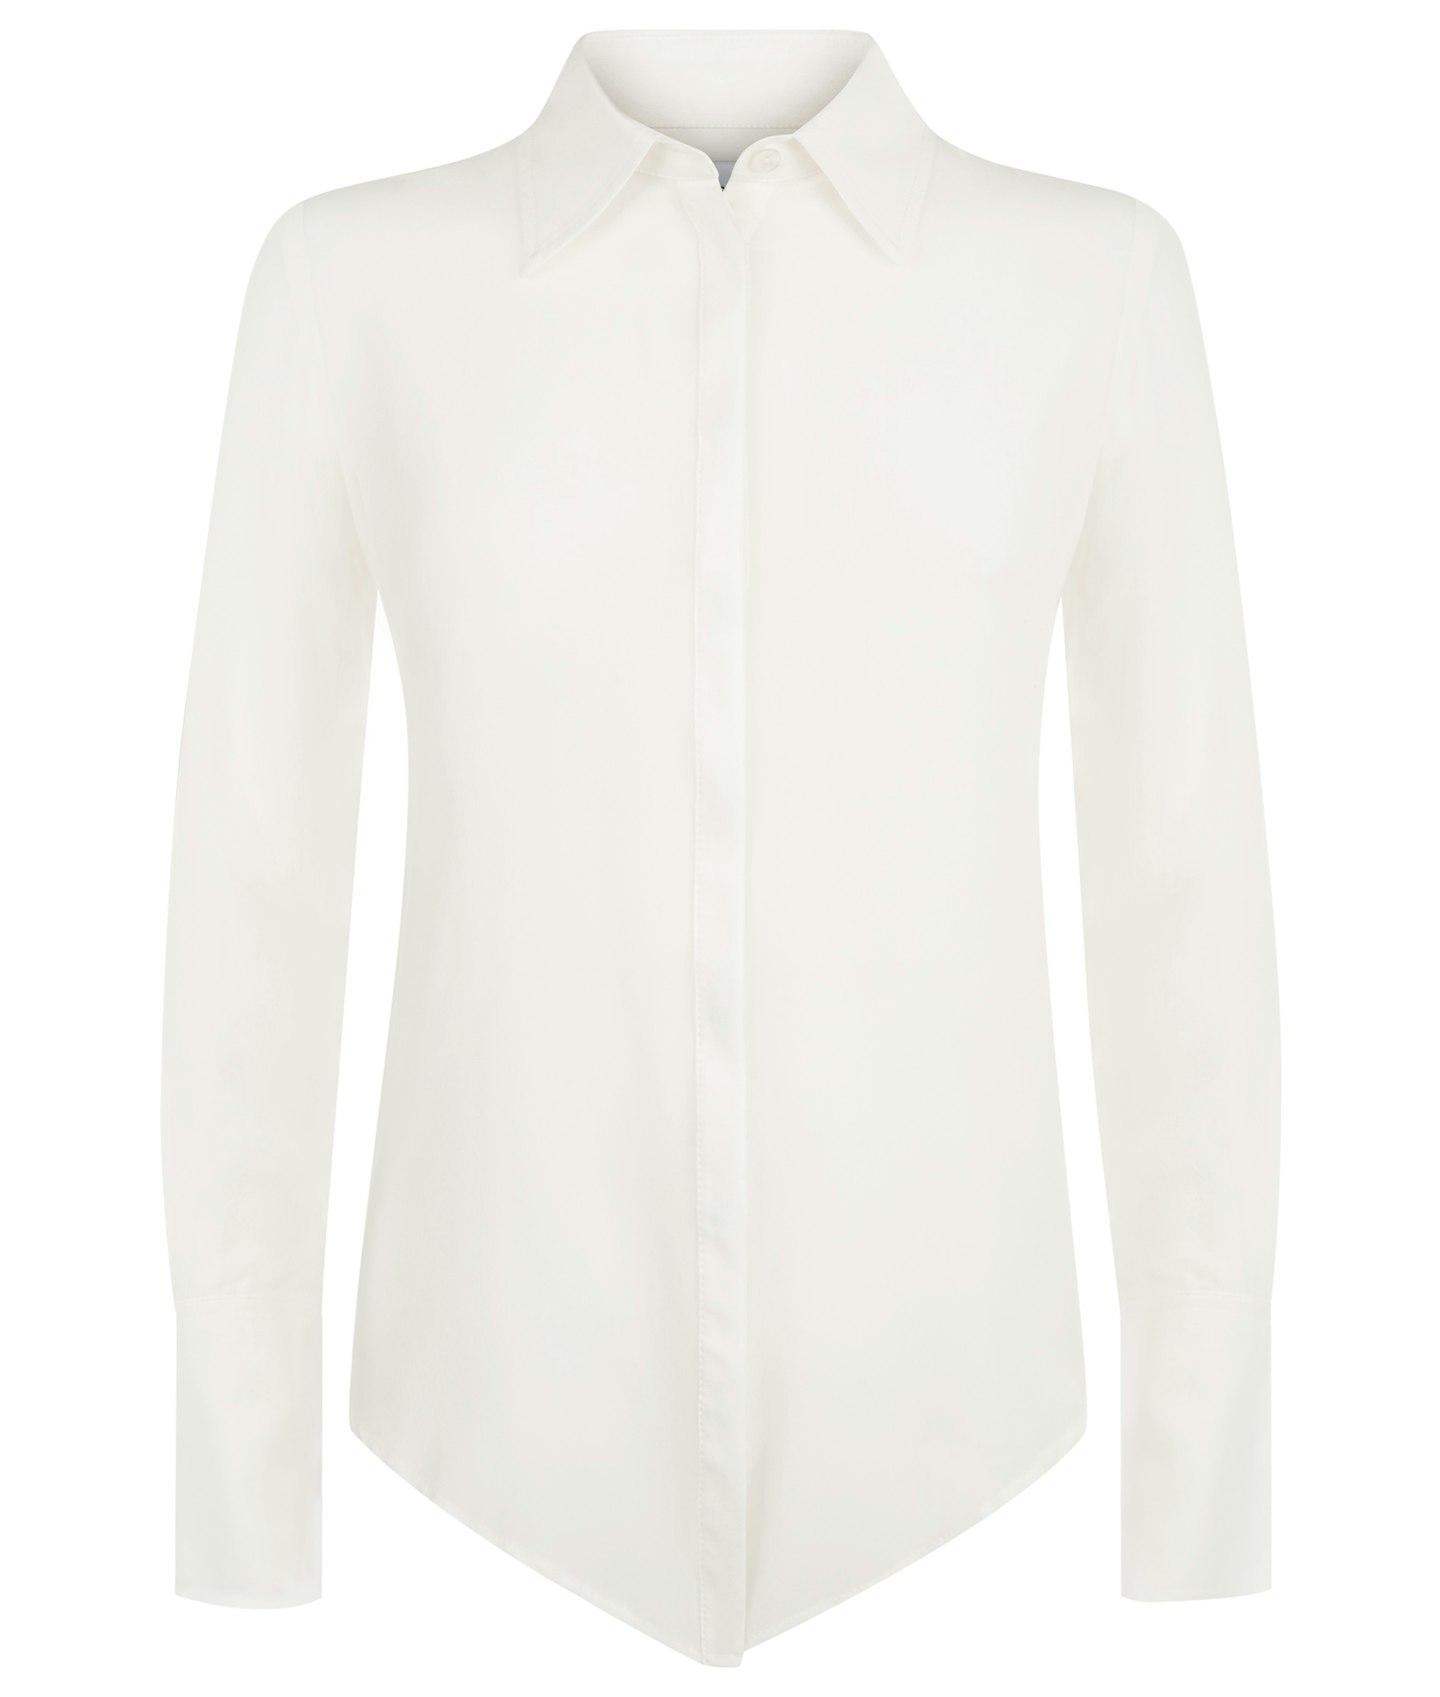 The Best White Shirts For Women In 2023